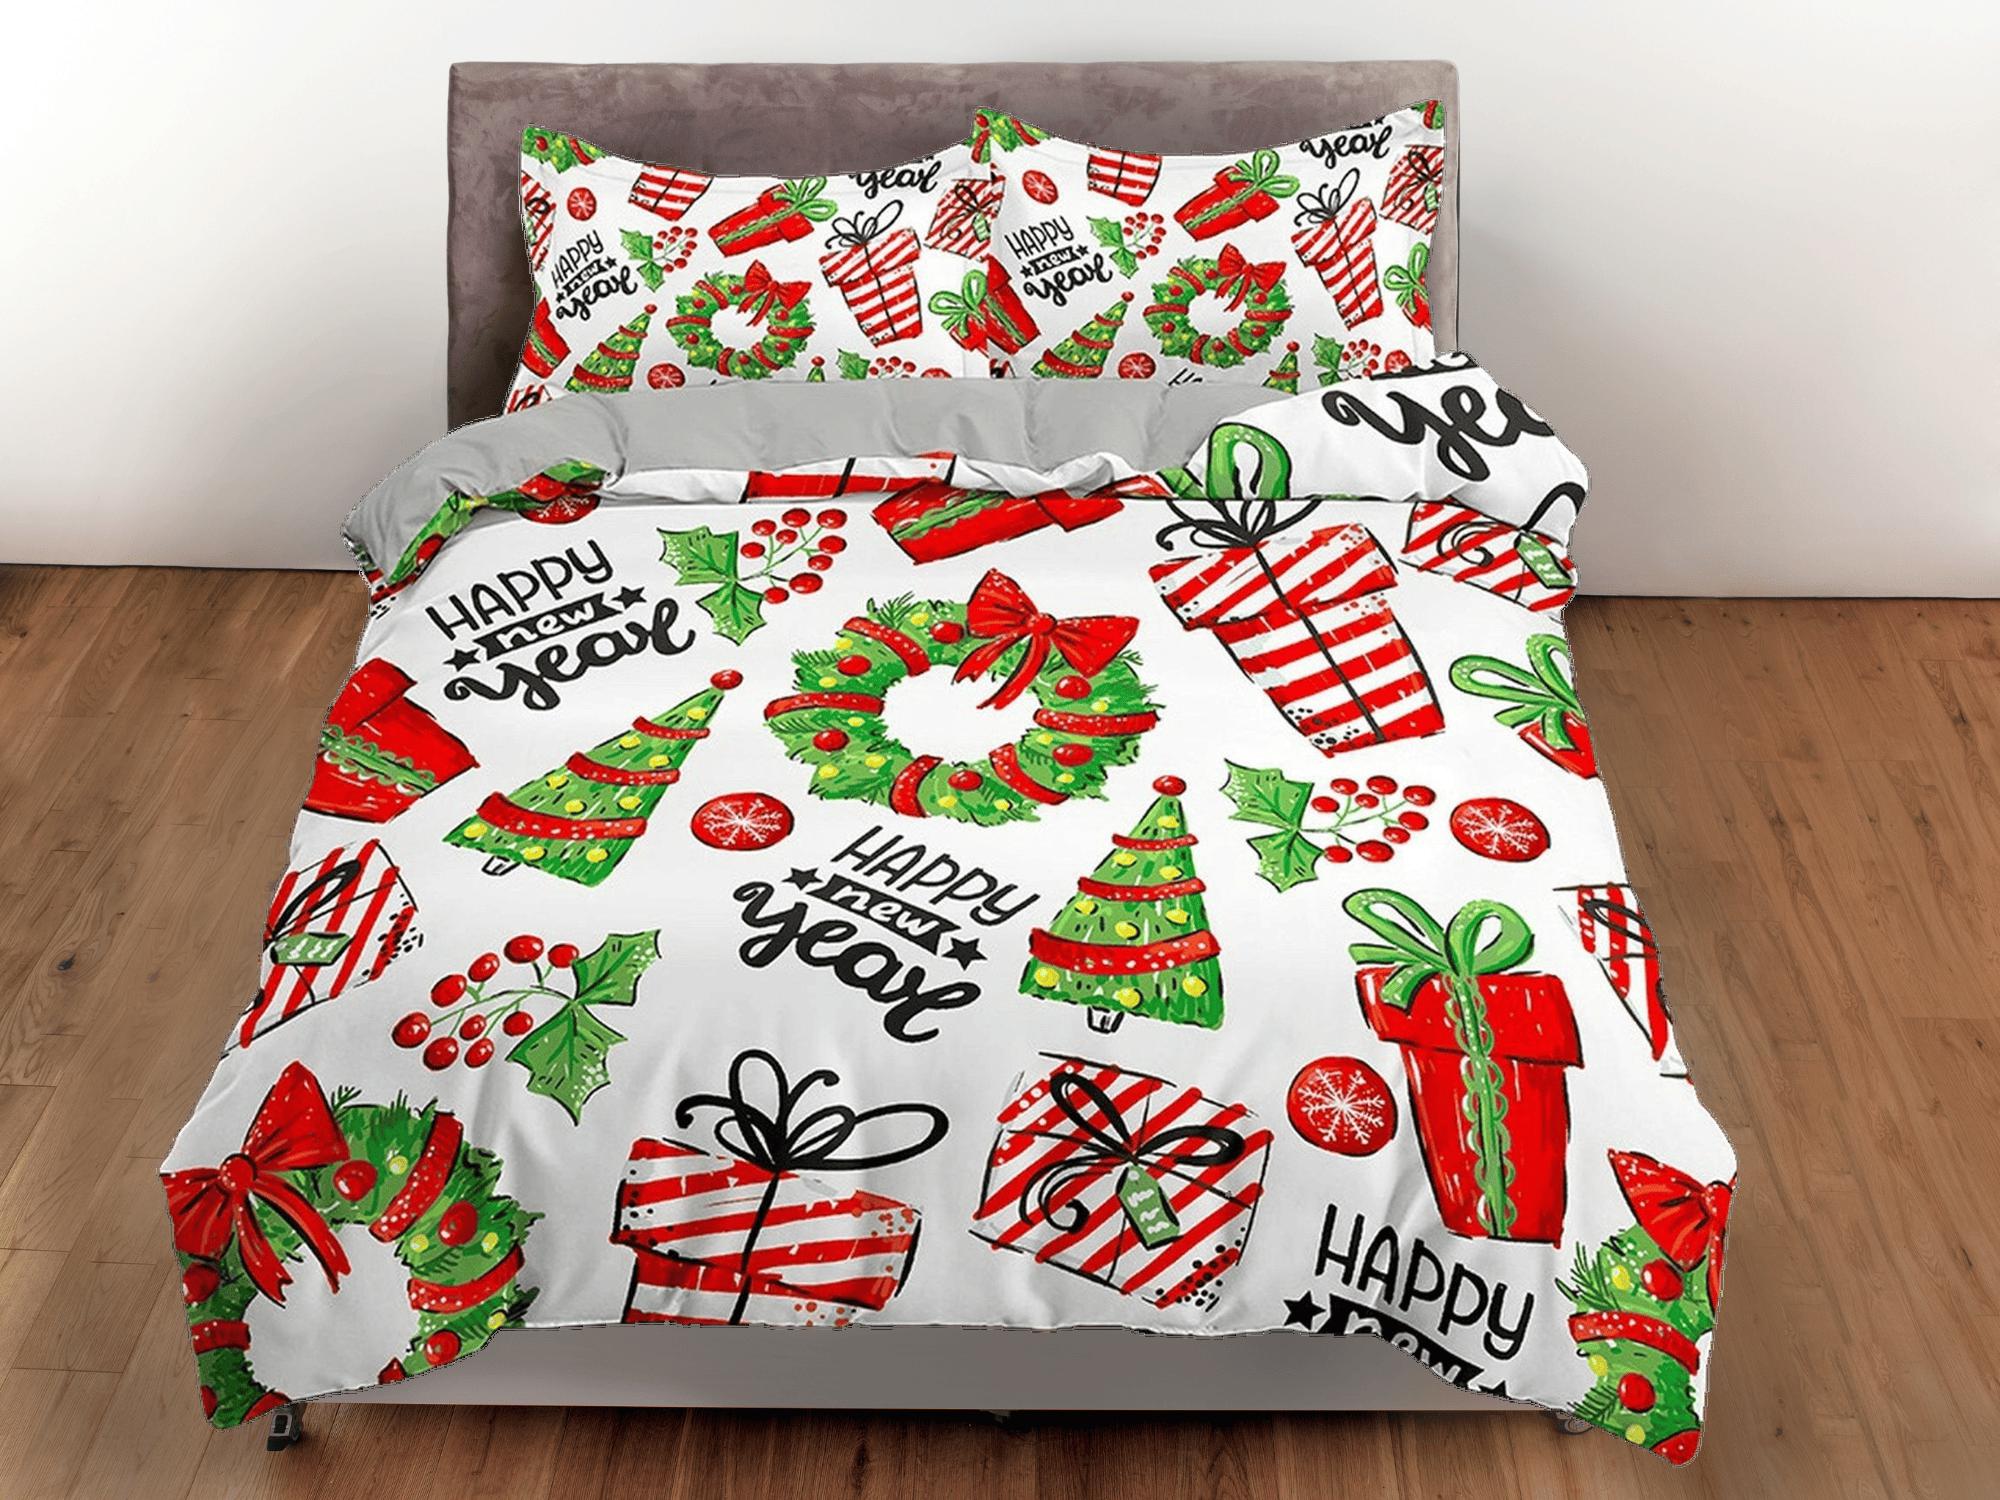 daintyduvet Holiday gifts and decors duvet cover set, christmas full size bedding & pillowcase, college bedding, crib toddler bedding, holiday gift room